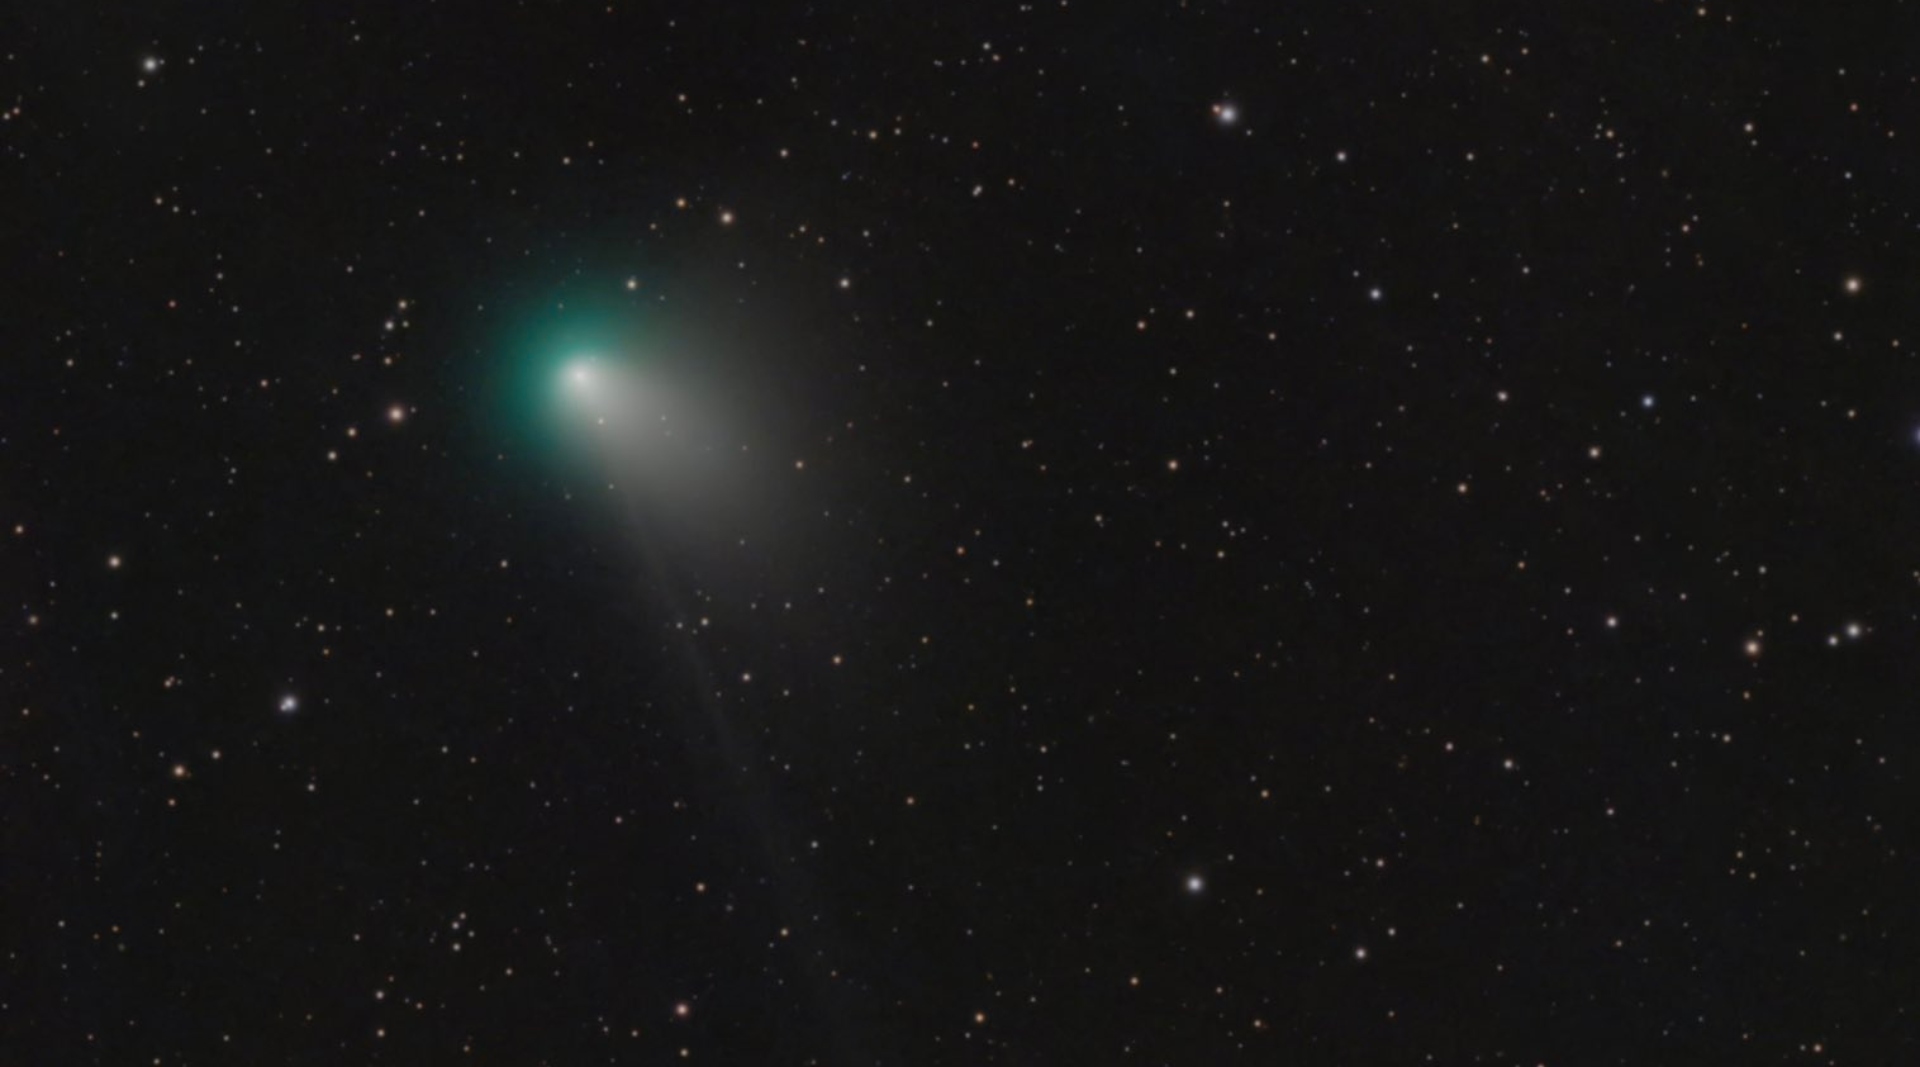 The bright comet was photographed by specialists in the field from the first days of 2023. (Twitter/@brennanmgilmore)